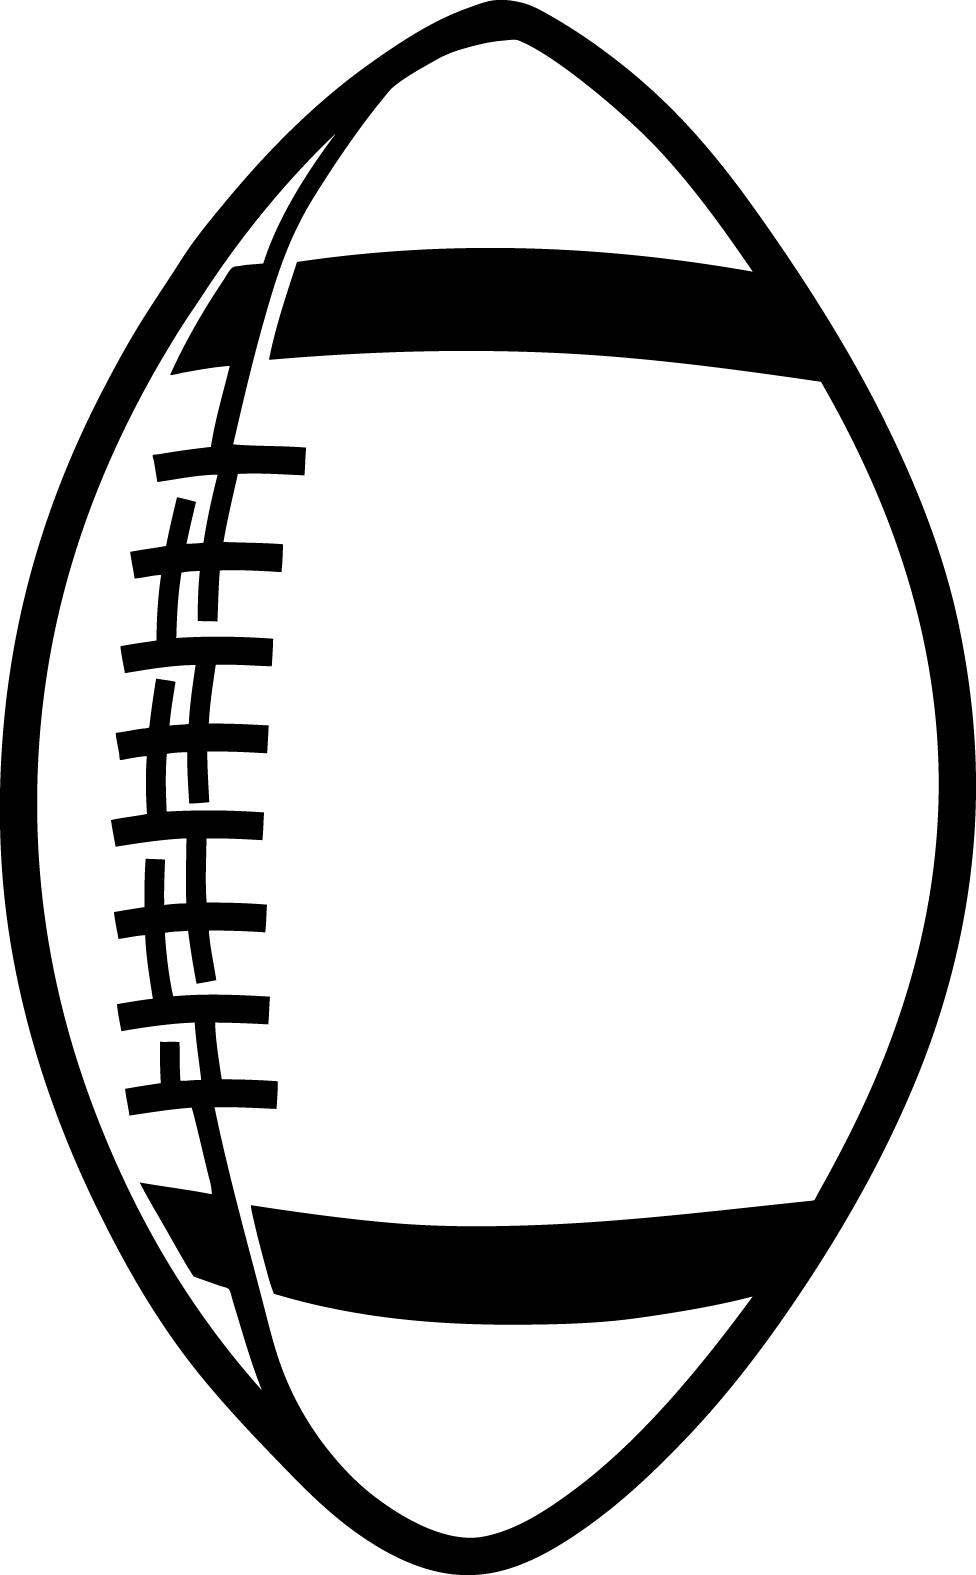 Football Clipart Images | Clipart Panda - Free Clipart Images